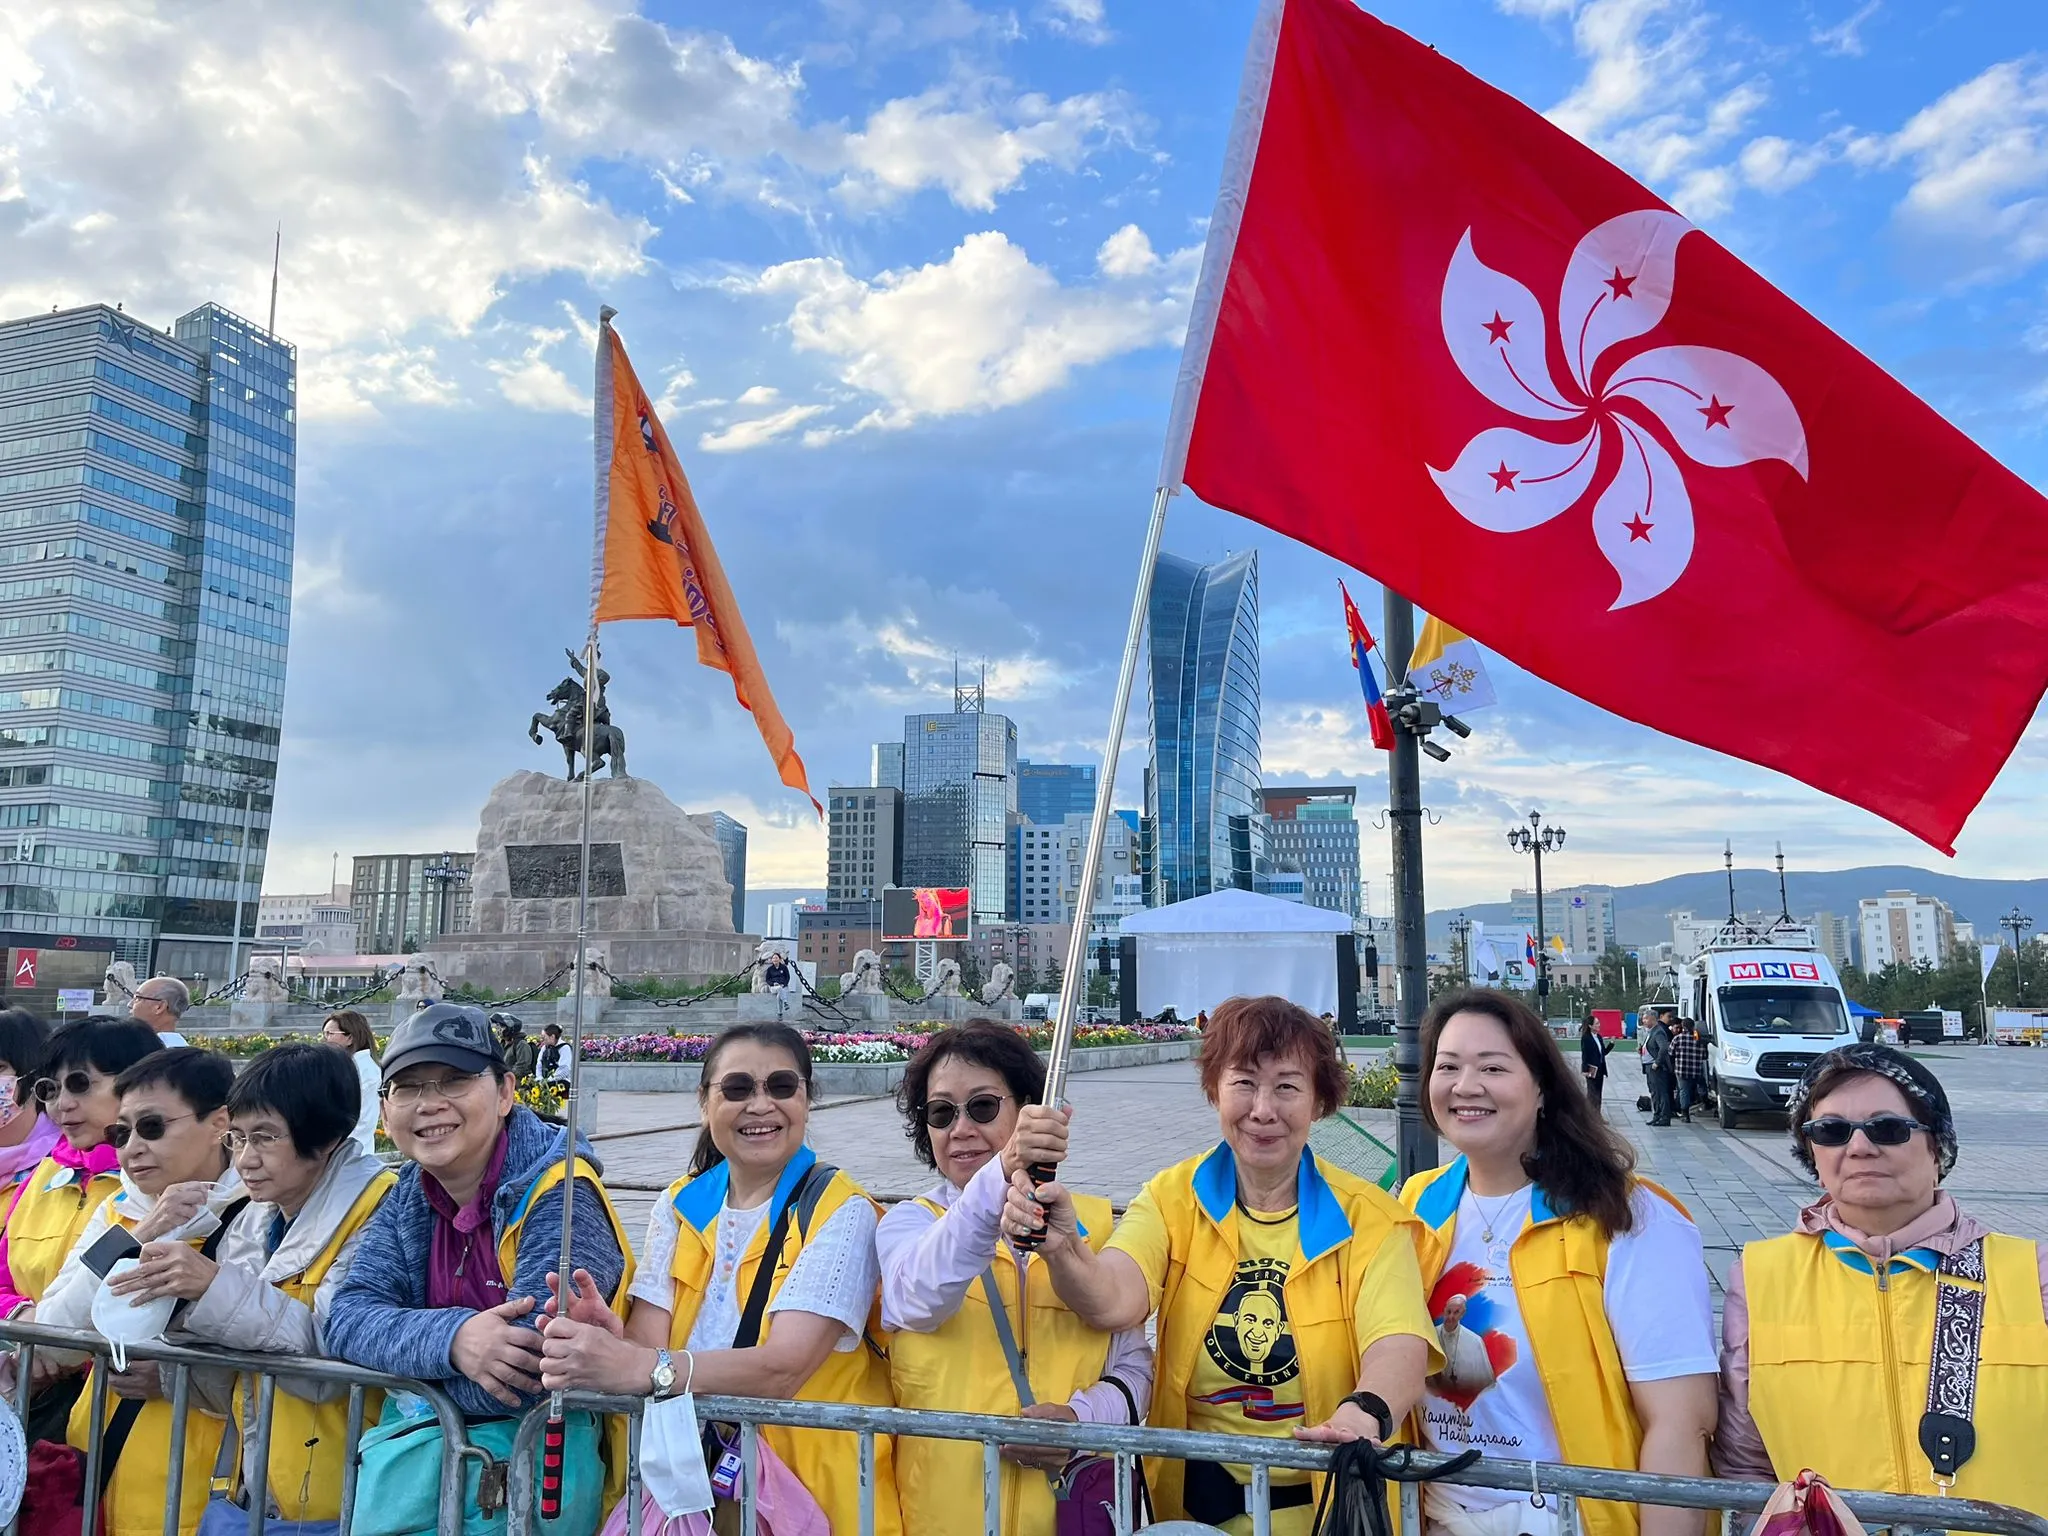 Catholic pilgrims from Hong Kong came to see the pope at the welcome ceremony in Sukhbaatar Square in Ulaanbaatar, Mongolia on Sept. 2, 2023.?w=200&h=150